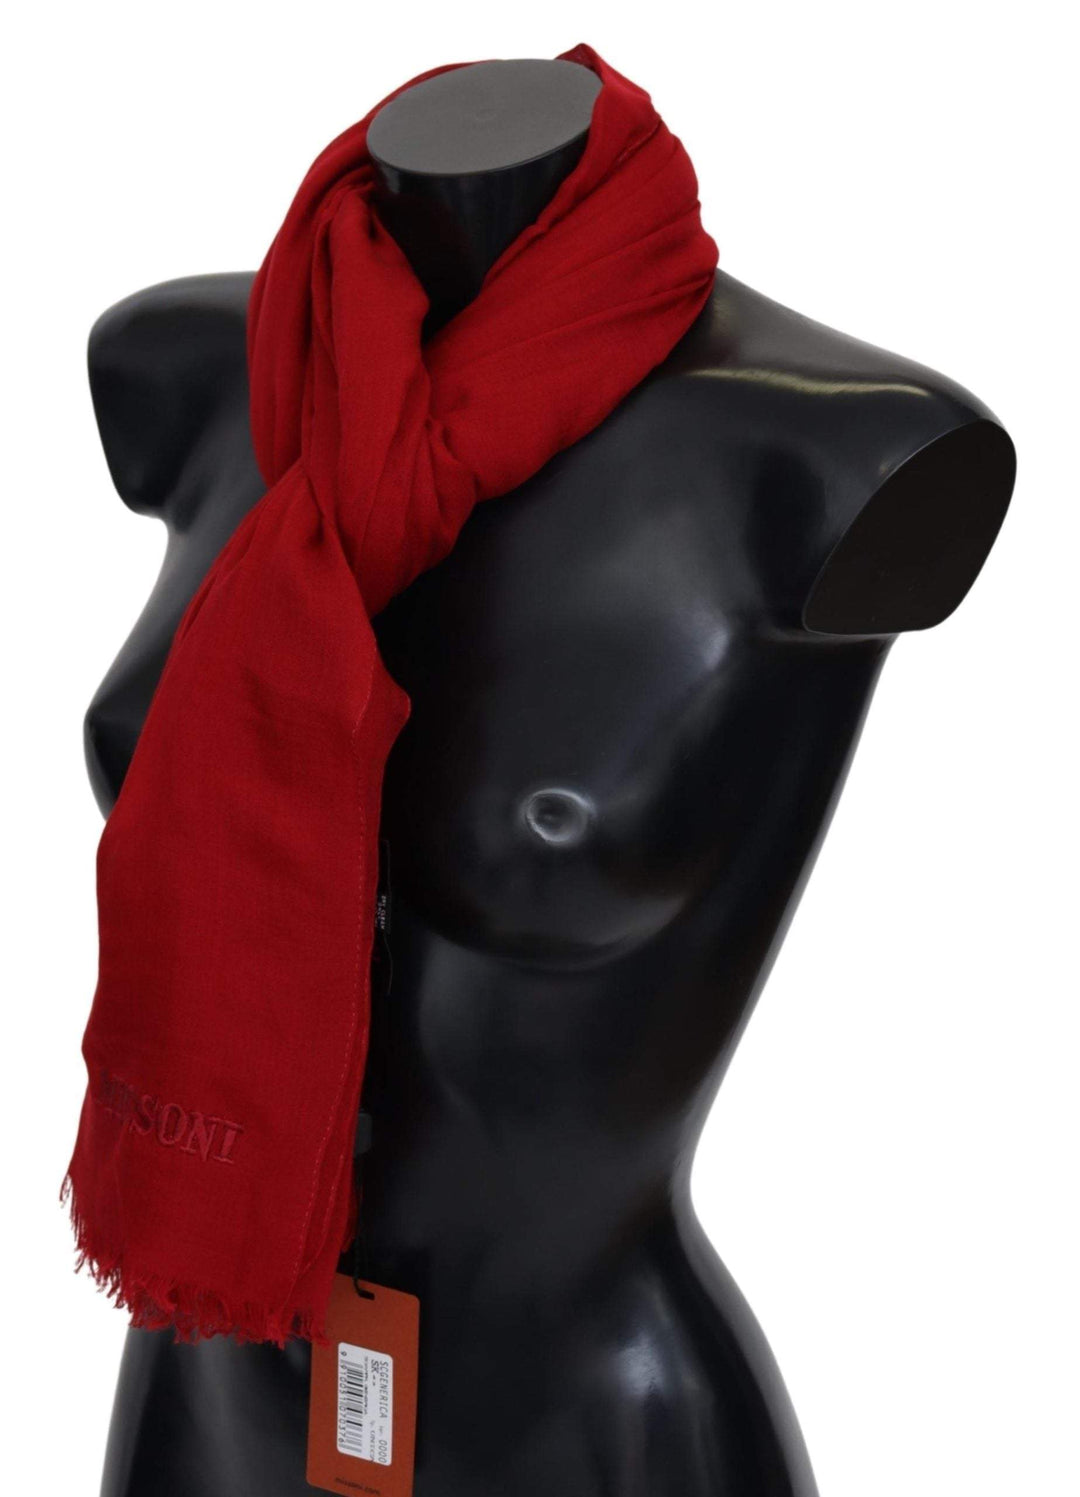 Missoni Red Cashmere Unisex Neck Wrap Fringes Scarf #men, feed-agegroup-adult, feed-color-Red, feed-gender-male, Missoni, Red, Scarves - Men - Accessories at SEYMAYKA